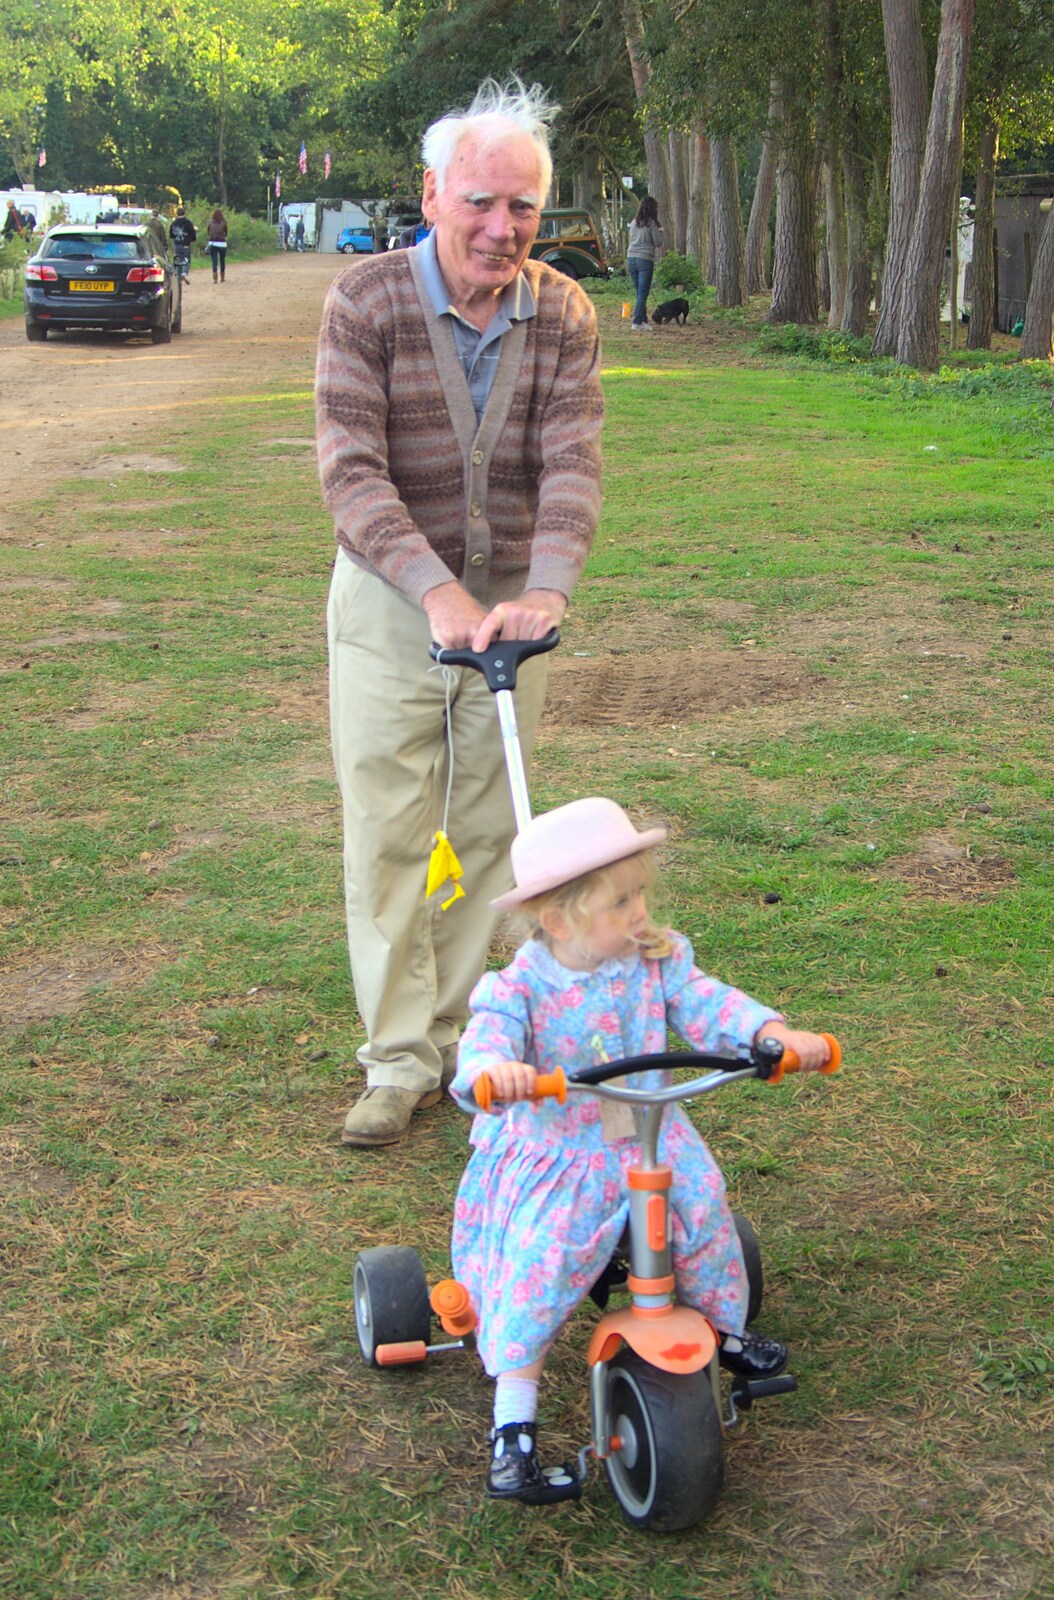 Amelia gets wheeled around by Grandad from The 1940s Steam Train Weekend, Holt, Norfolk - 18th September 2011